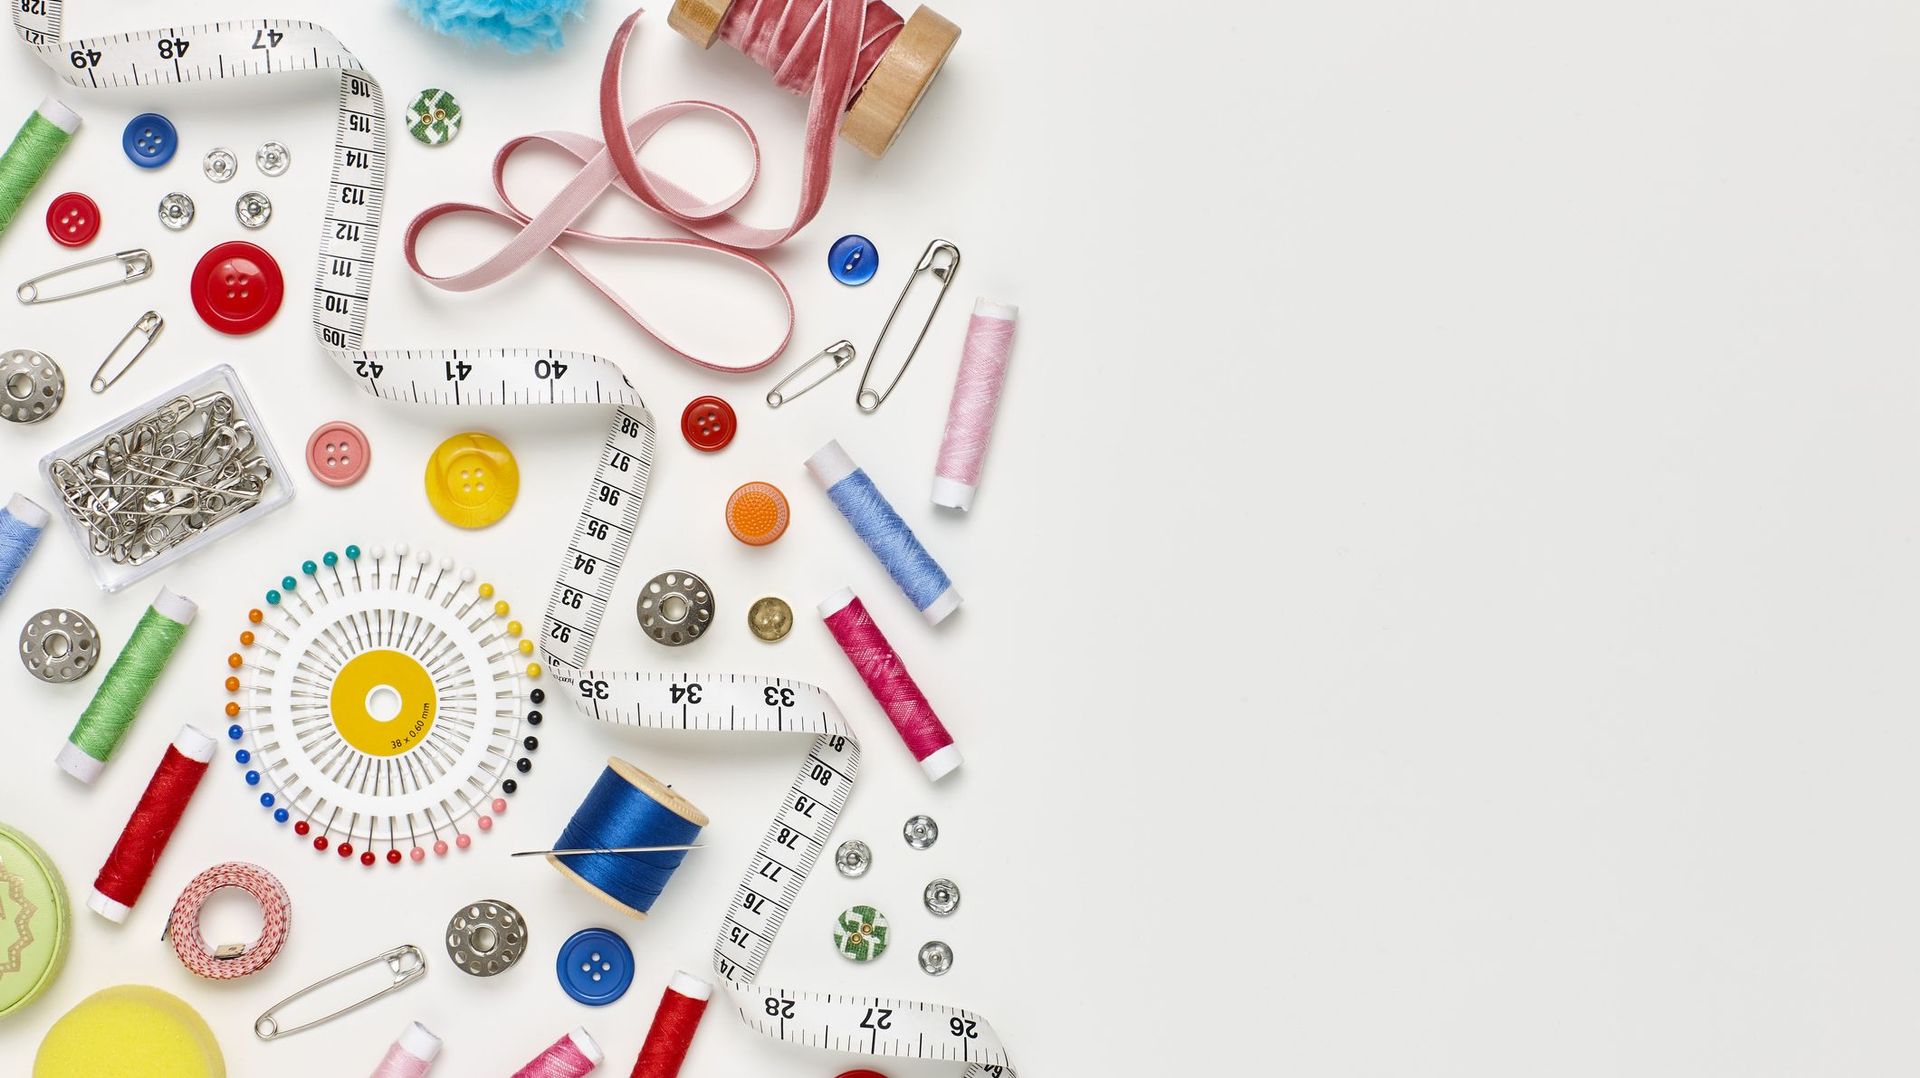 Overhead flat lay of colorful sewing items on white background